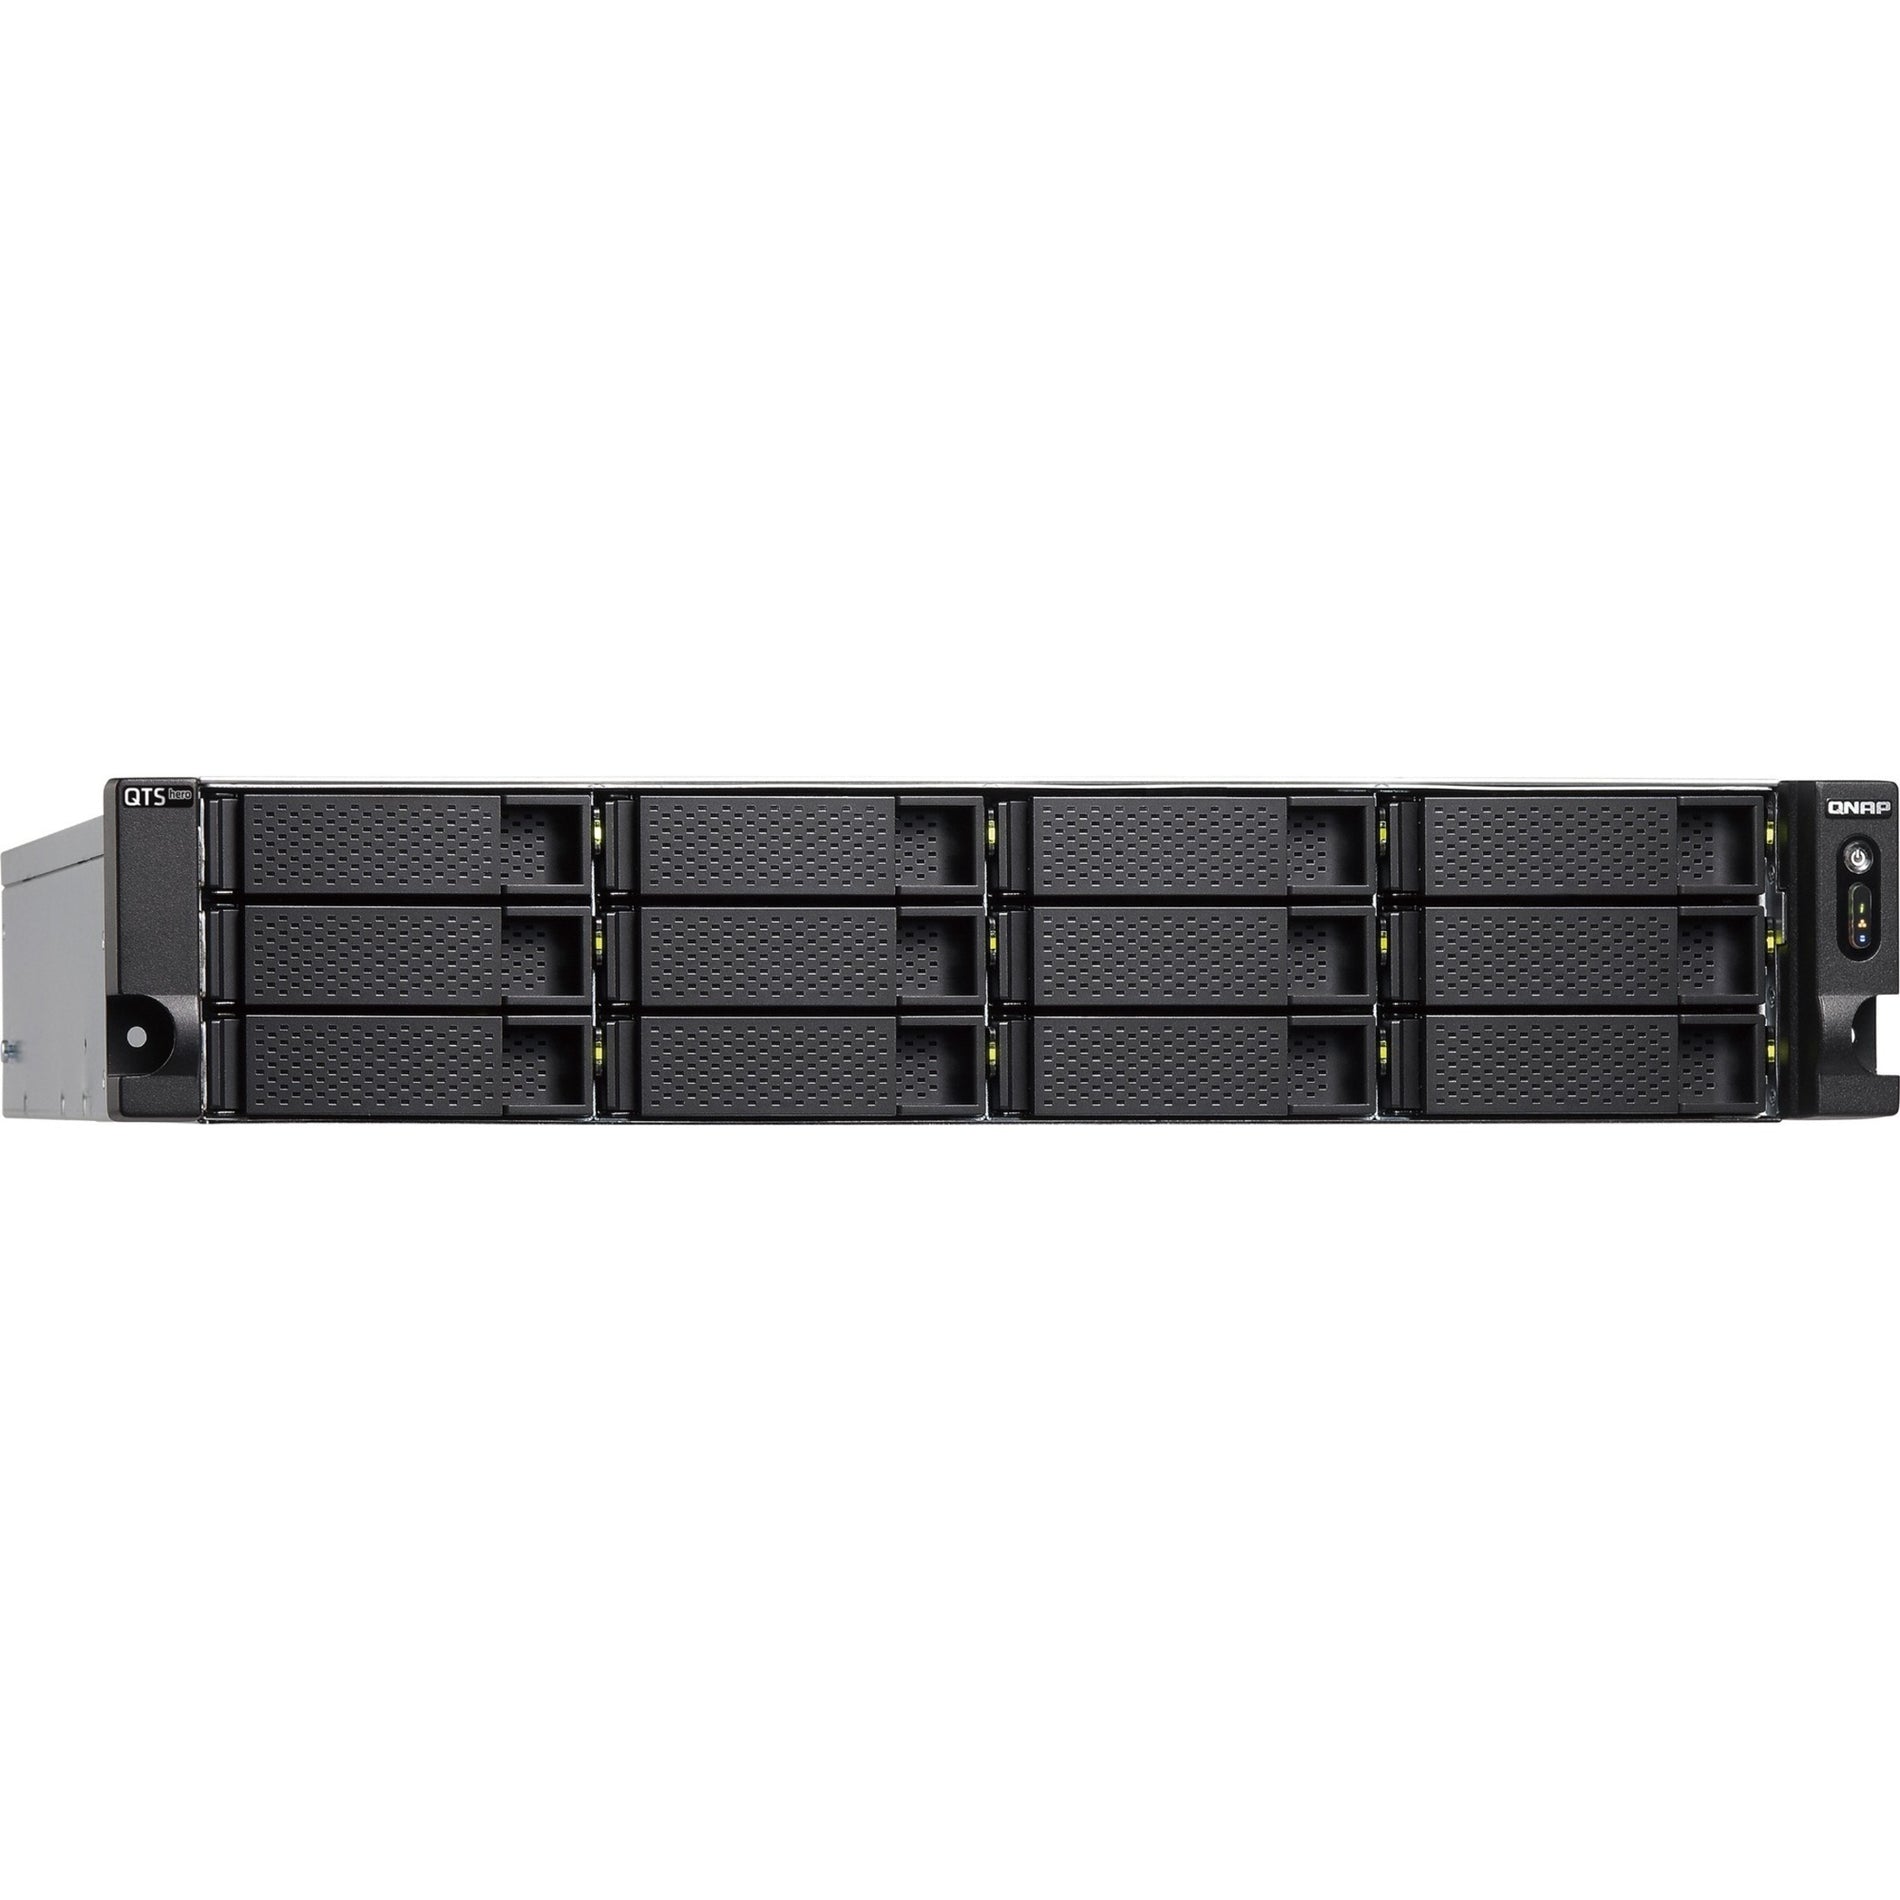 QNAP TS-H1283XU-RP-E2236-32G TS-h1283XU-RP-E2236-32G SAN/NAS Storage System, High Performance and Reliable Data Storage Solution